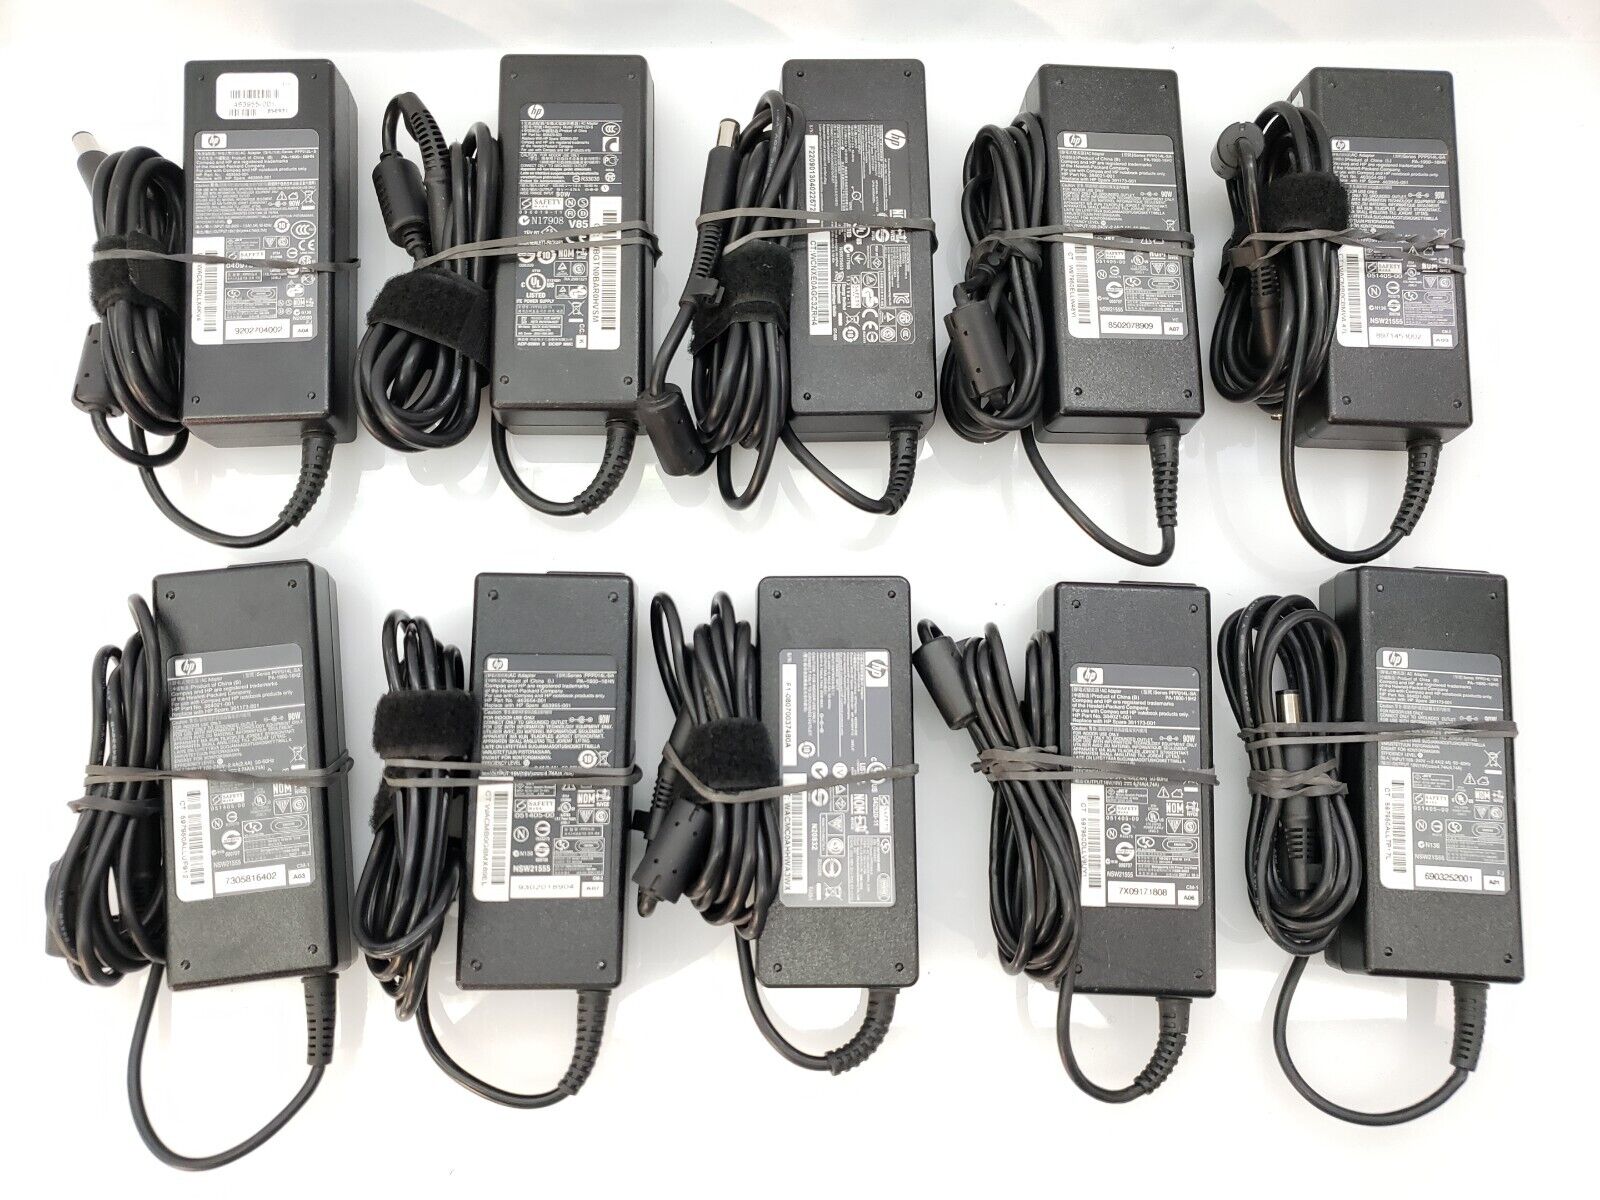 Lot of 10 Original Genuine Original HP 90W AC Adapter Large Tip Charger w/ Cable